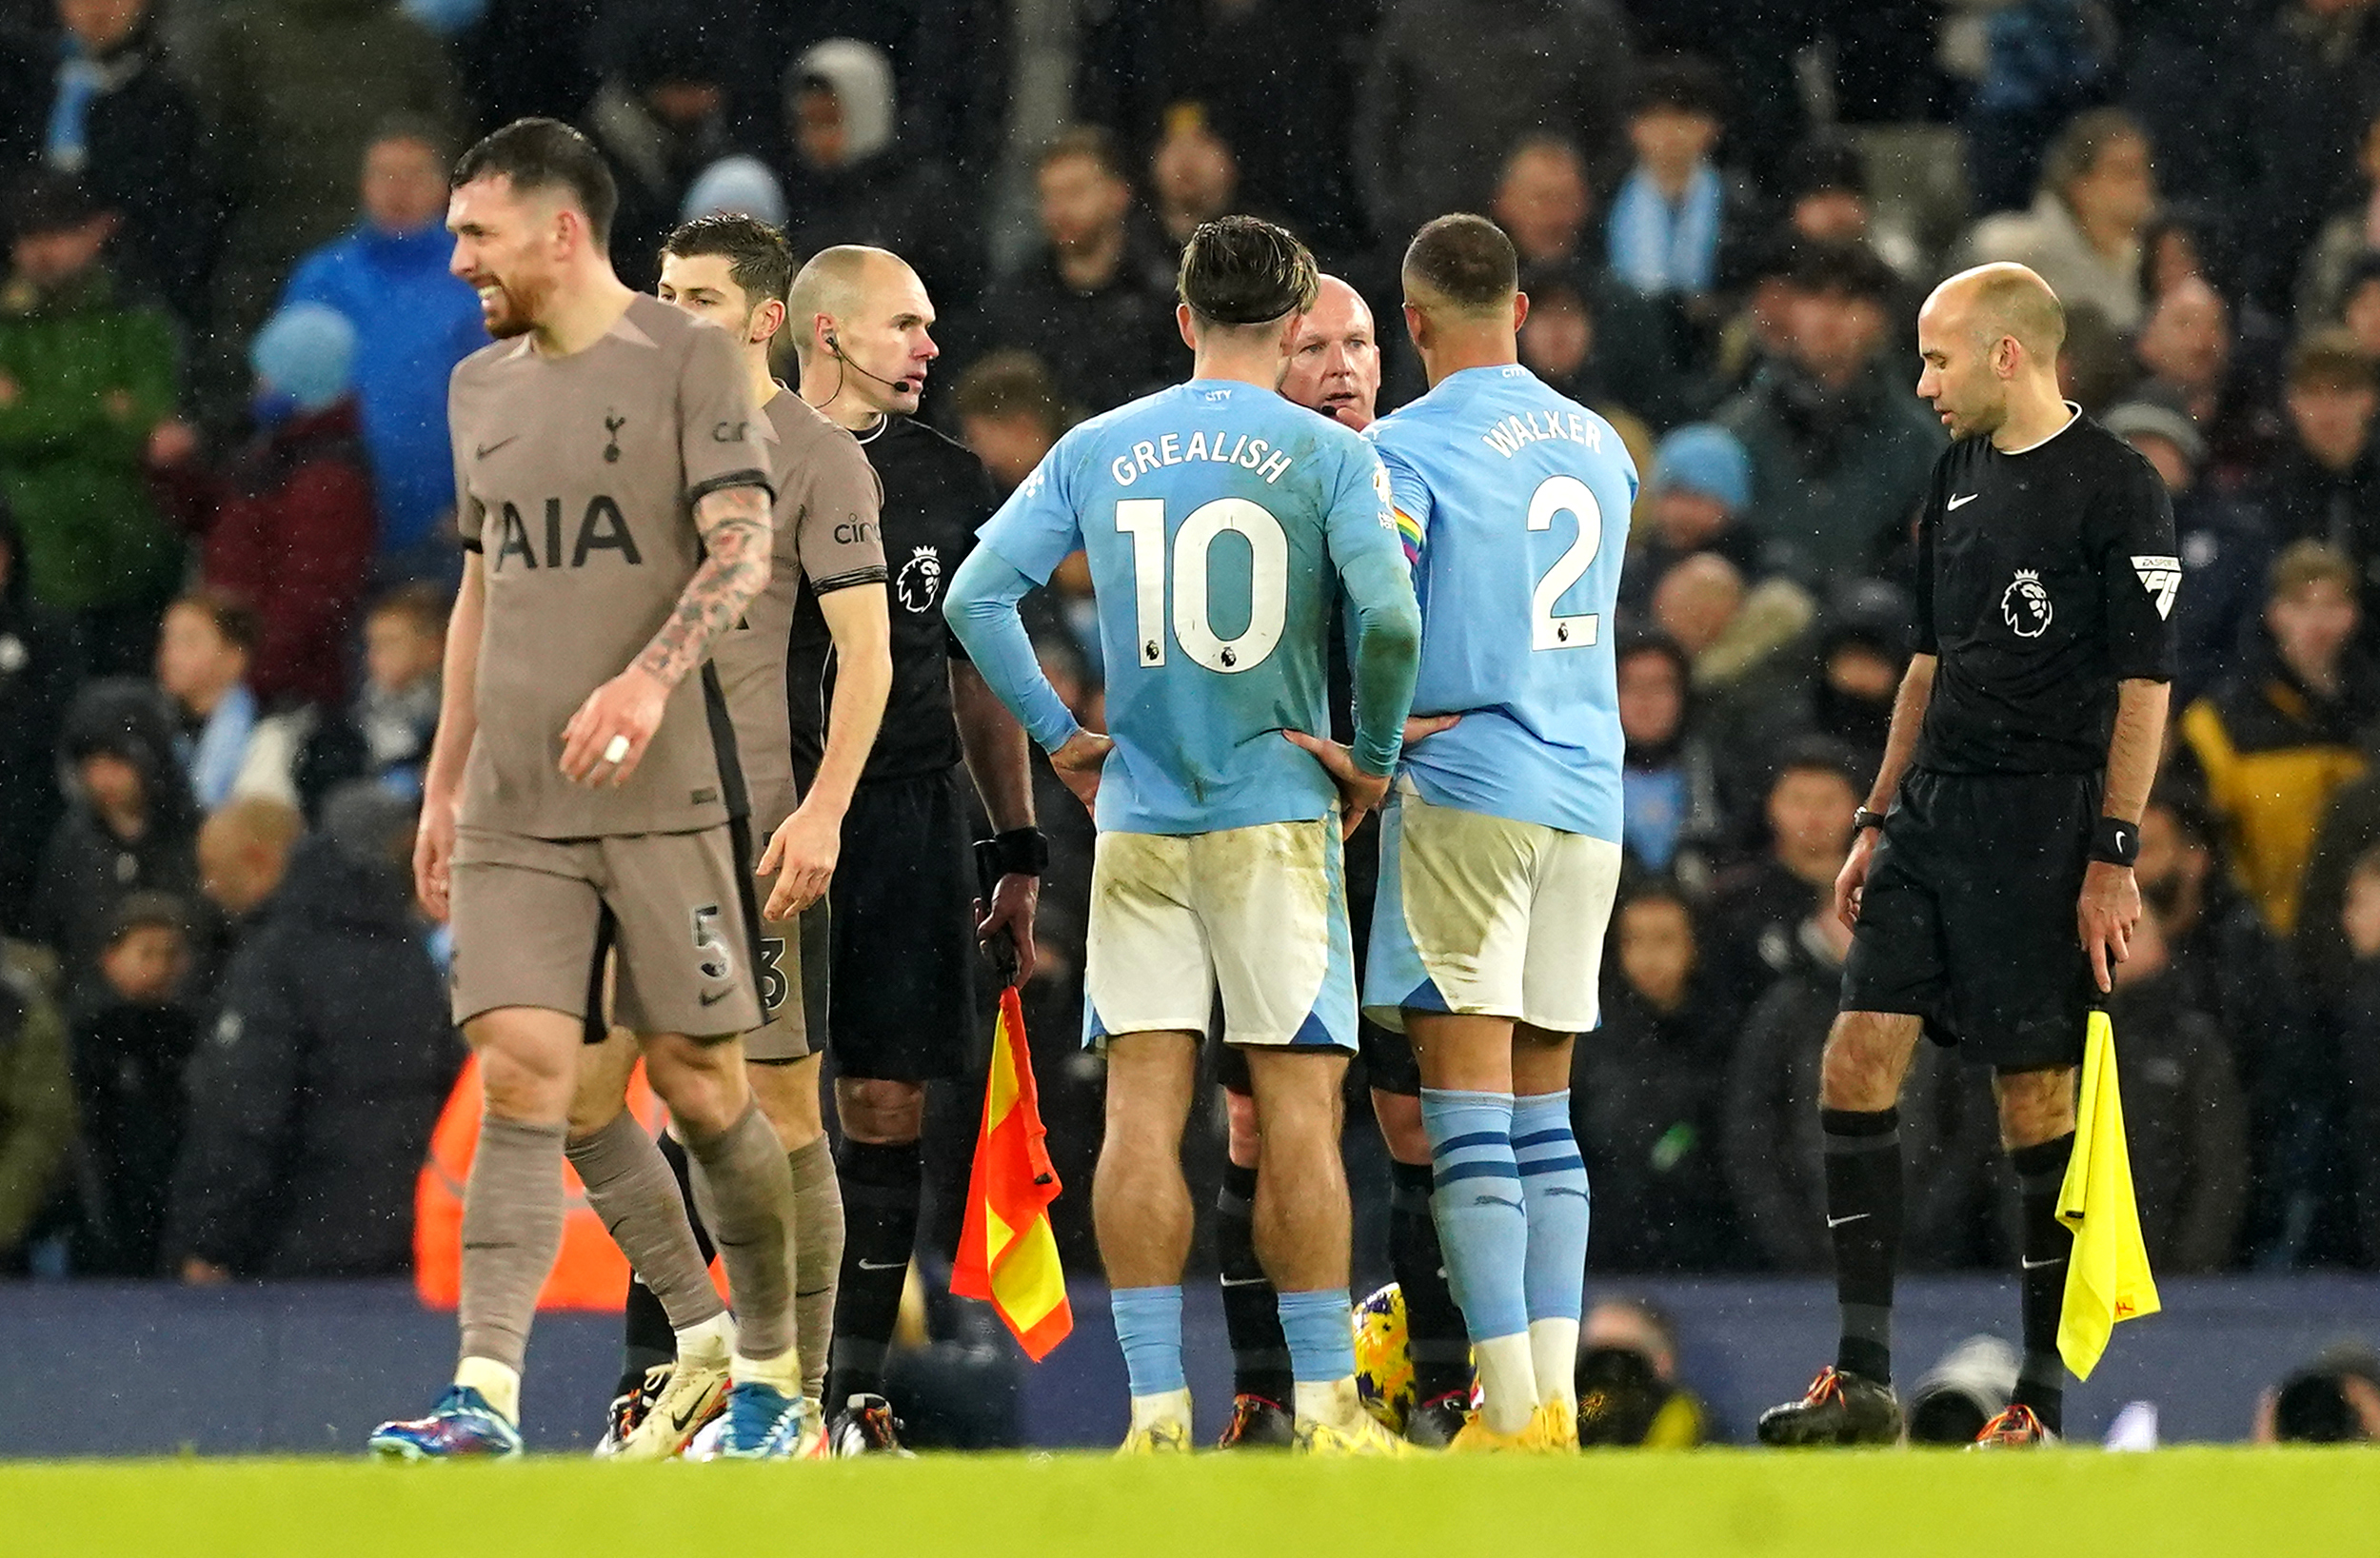 Man City charged by English FA after Haaland and others surrounded ref  during Tottenham draw